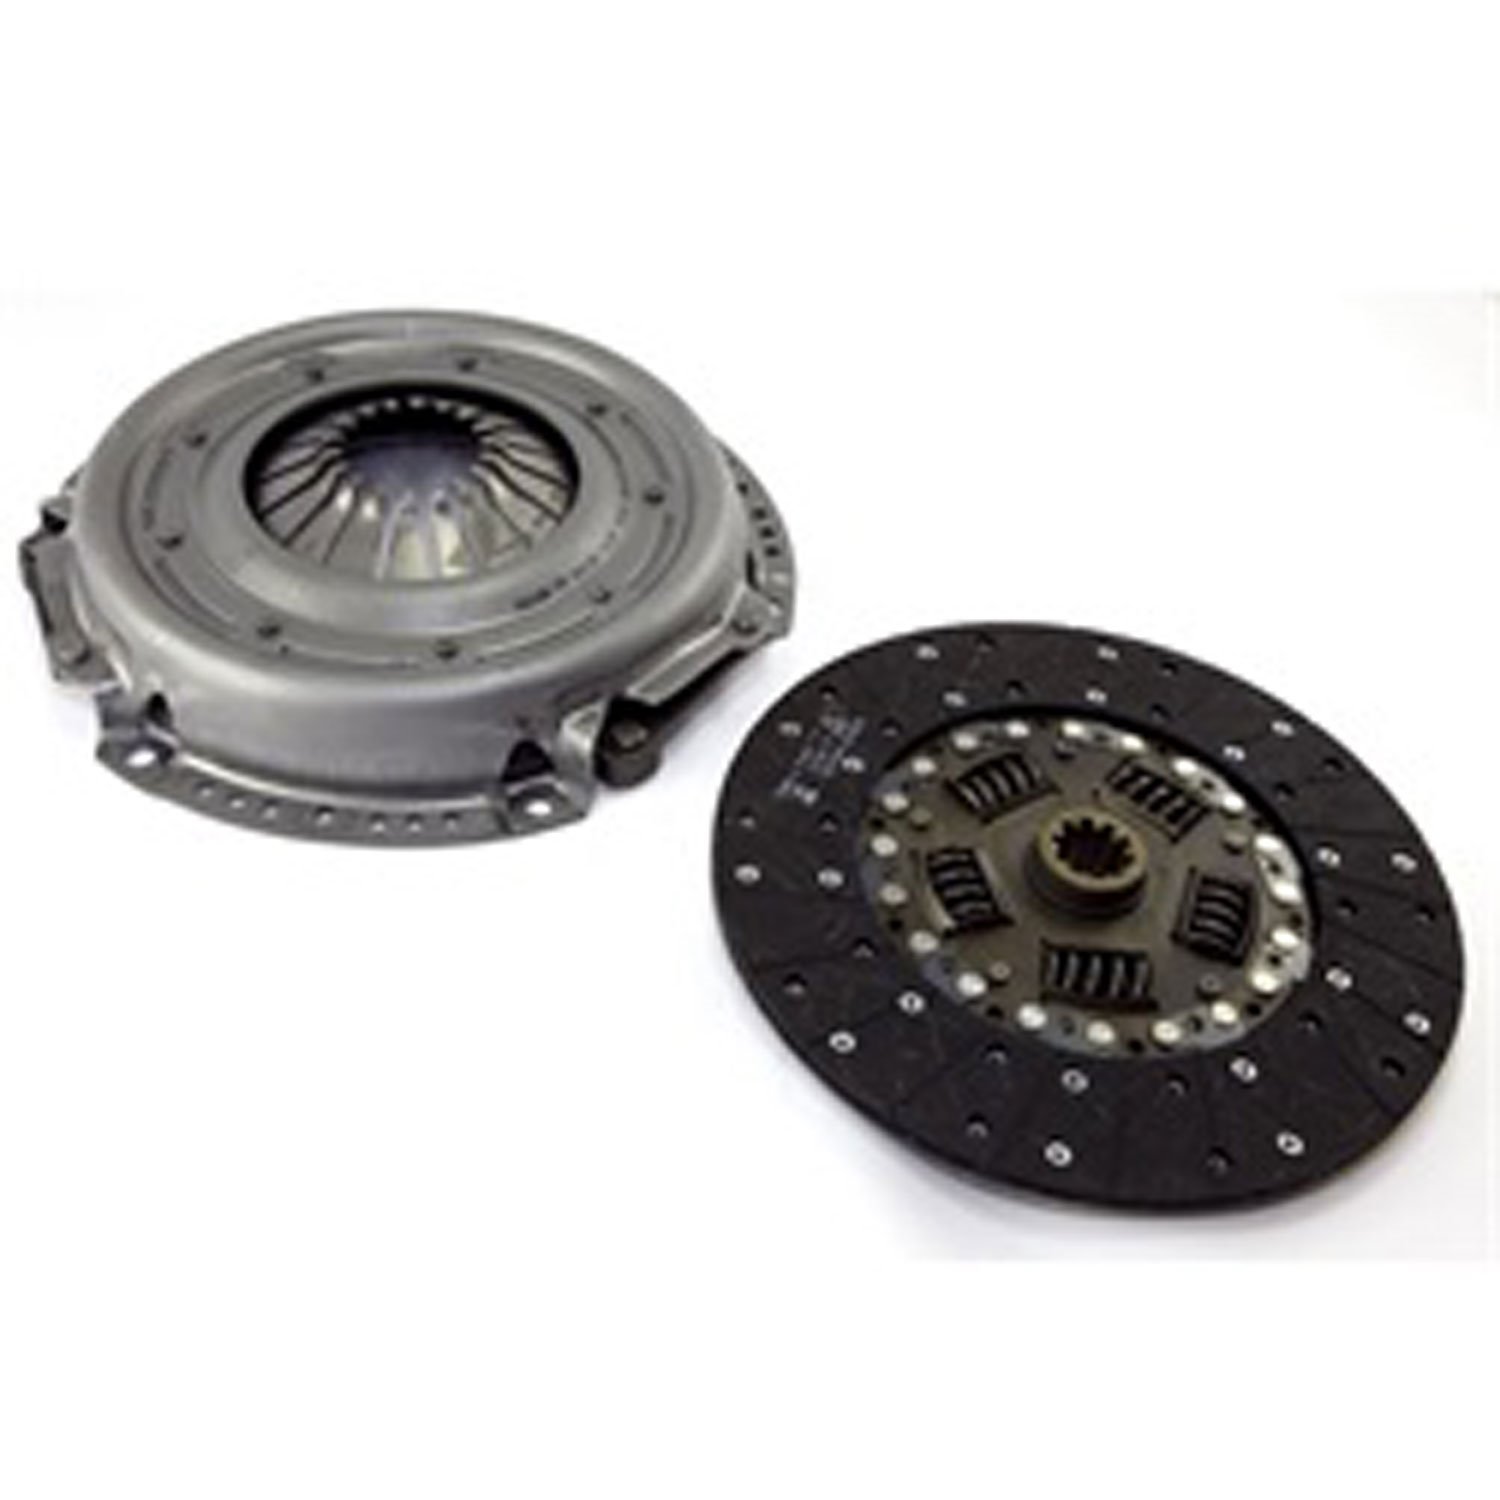 This Junior Clutch Kit from Omix-ADA fits 94-97 Jeep Cherokees 93-94 Grand Cherokees and 87-06 Wrang